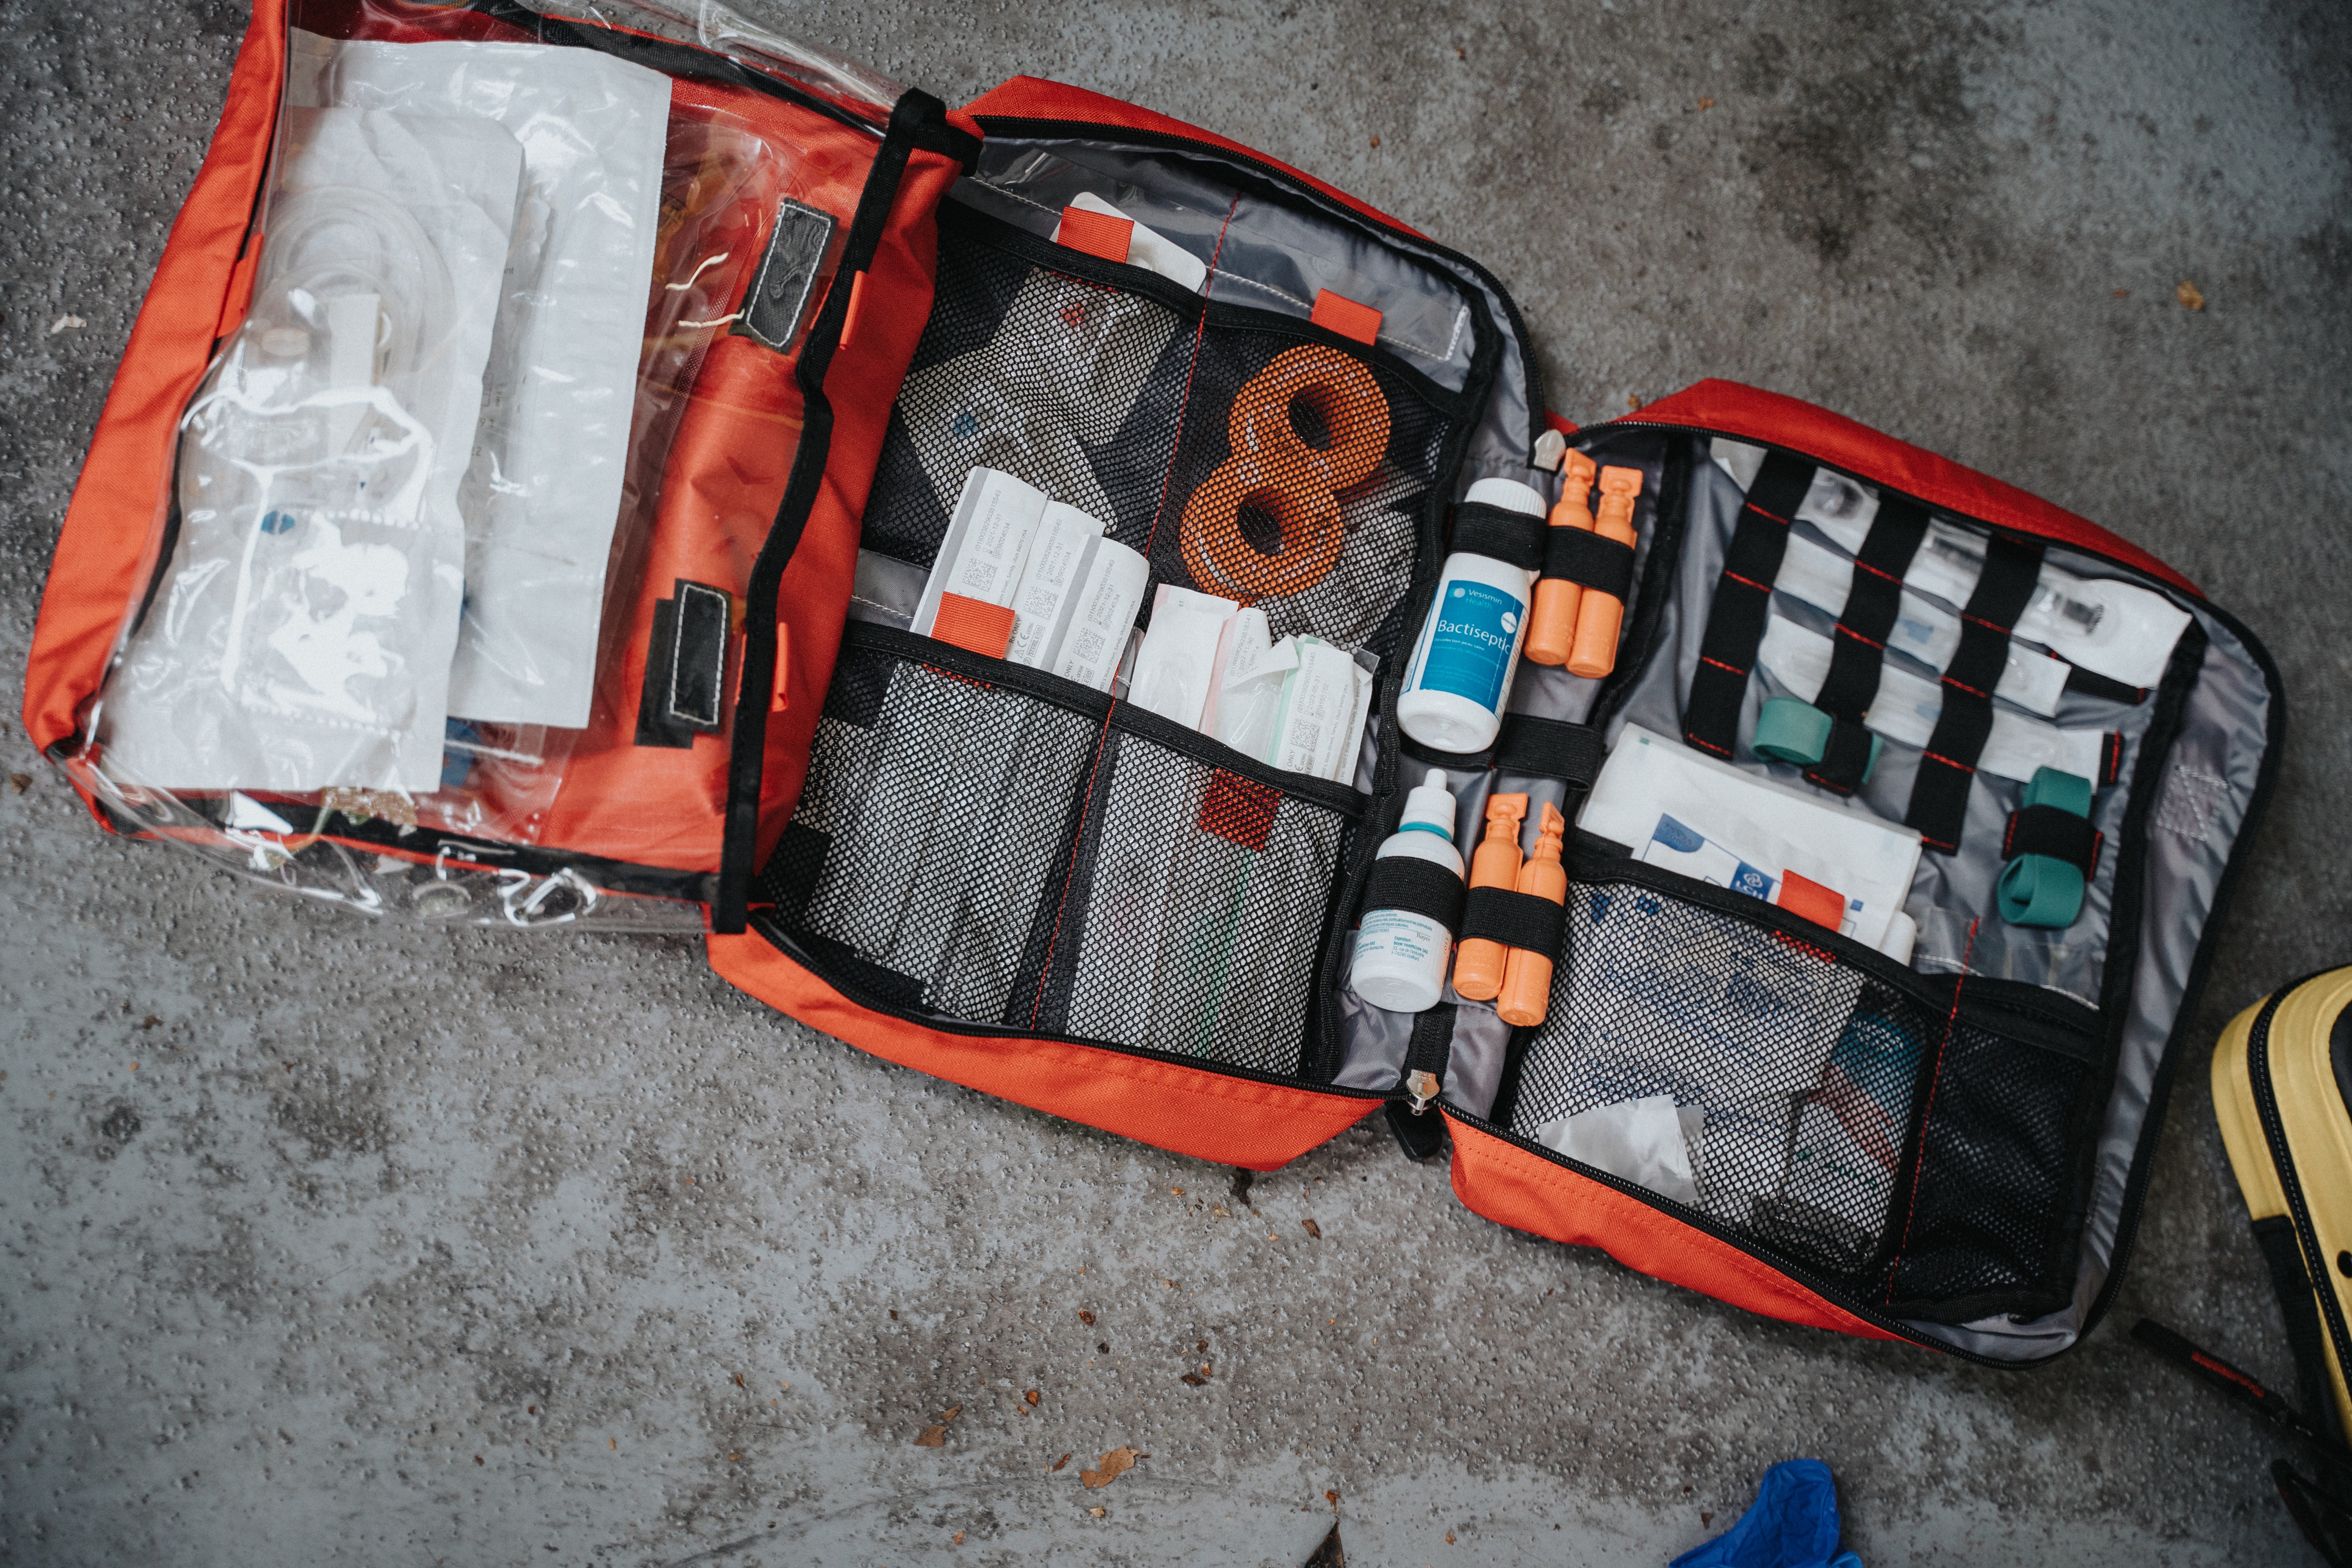 My Travel First Aid Kit